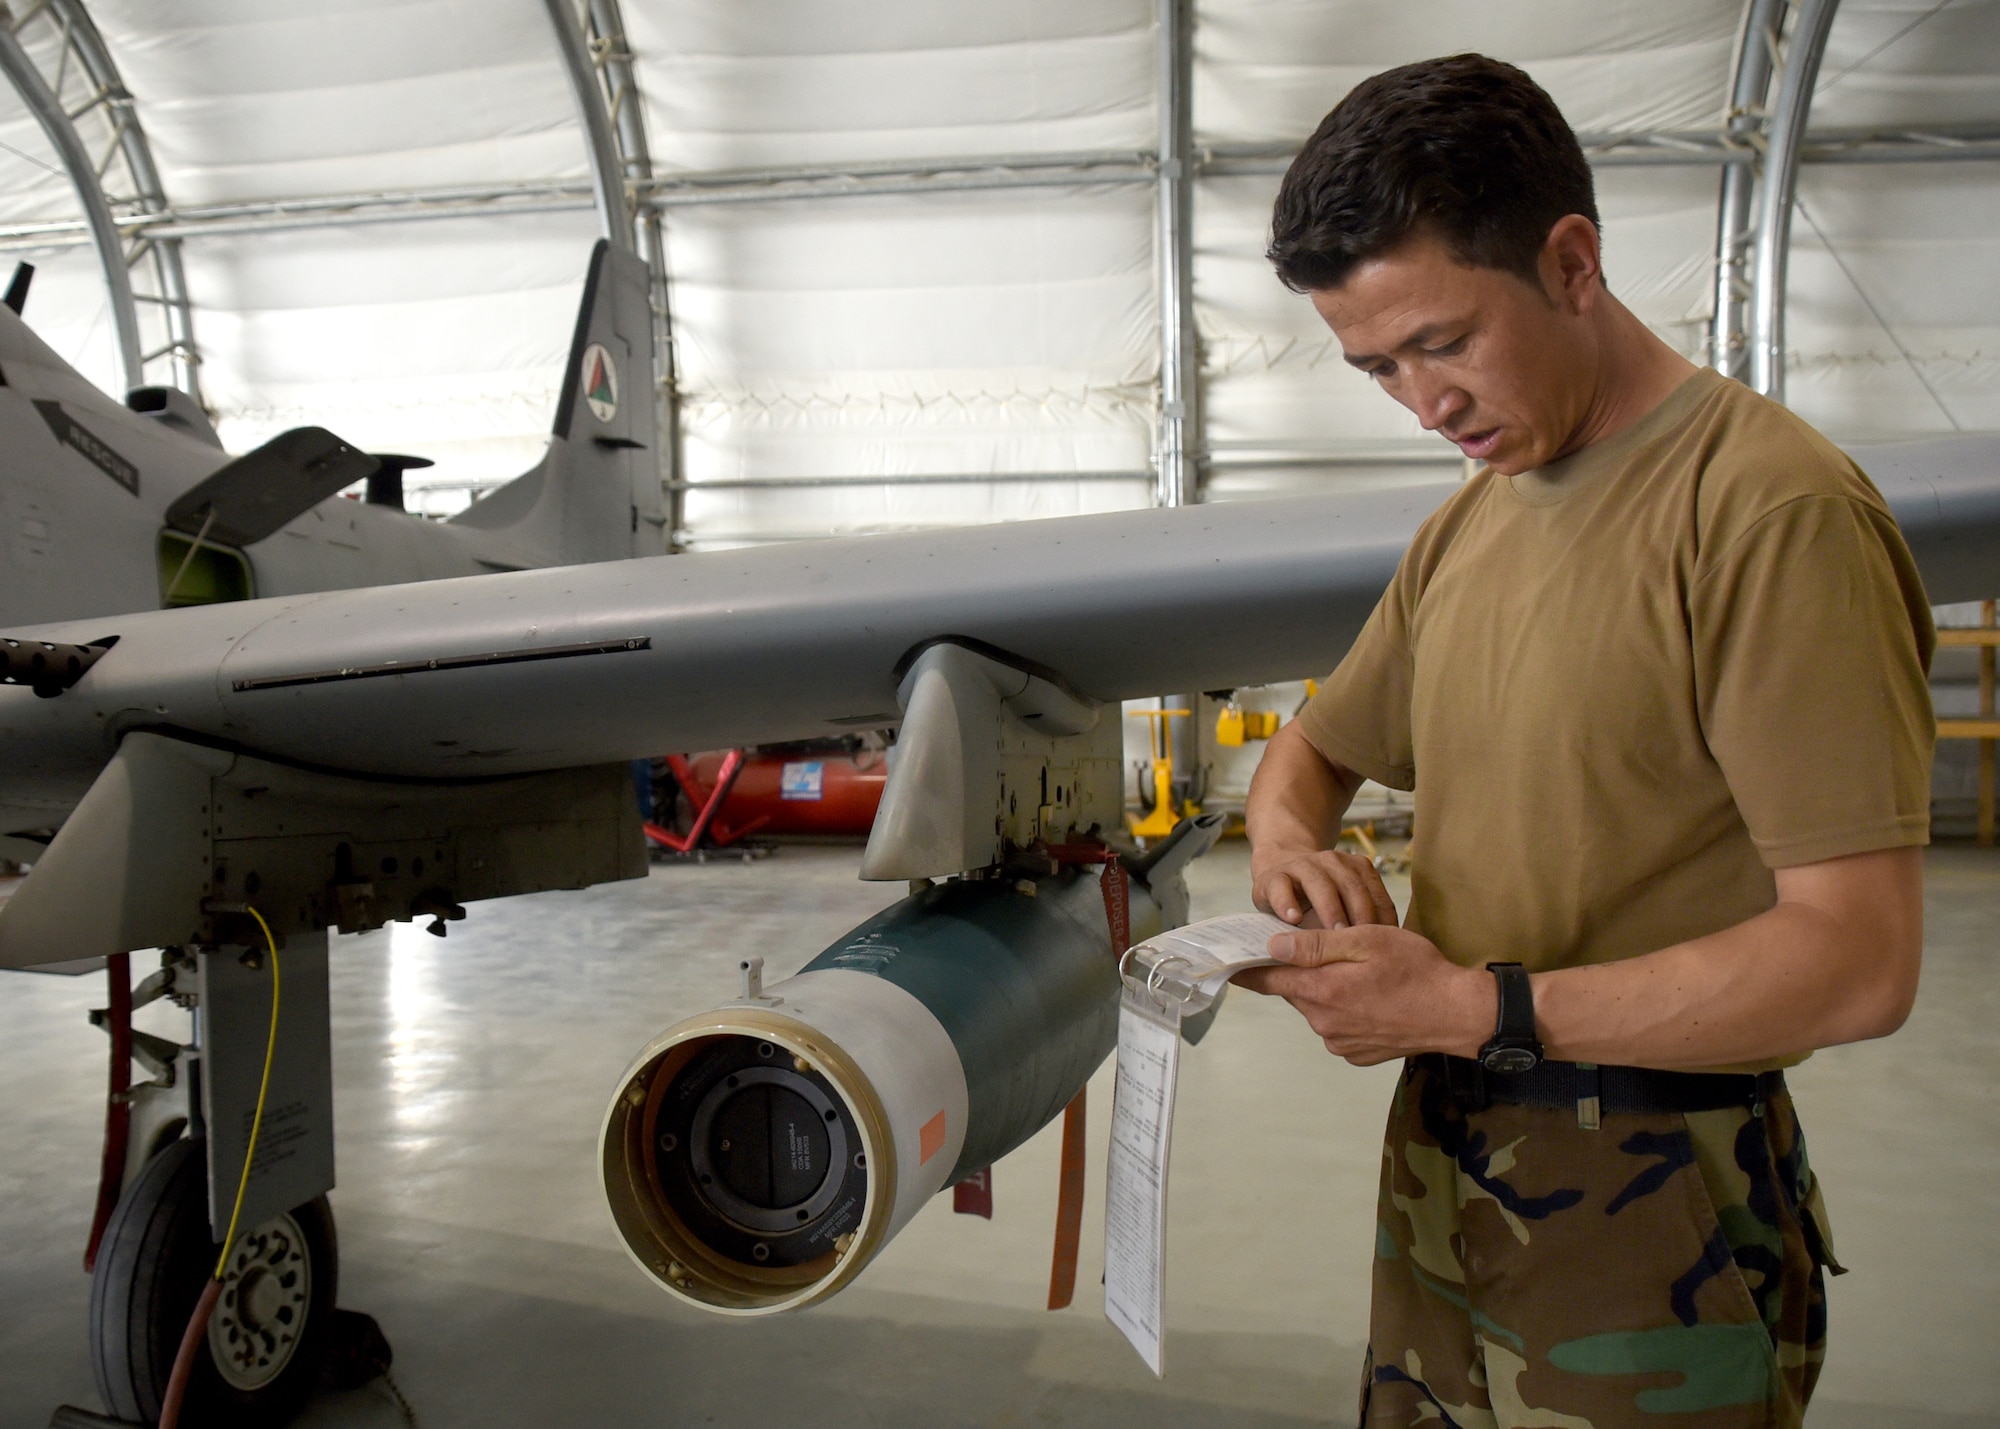 An Afghan Air Force A-29 Super Tucano maintainer reviews technical order instructions before downloading two GBU-12s (Guided Bomb Unit) at Kabul Air Wing, Afghanistan, July 26, 2017. Recently, AAF A-29 maintenance leadership requested to take full responsibility for flight line maintenance operations from Train, Advise, Assist Command-Air advisors and contract maintenance. This initiative by the maintainers is another step closer to the AAF becoming a professional, capable and sustainable force. (U.S. Air Force photo by Tech. Sgt. Veronica Pierce)